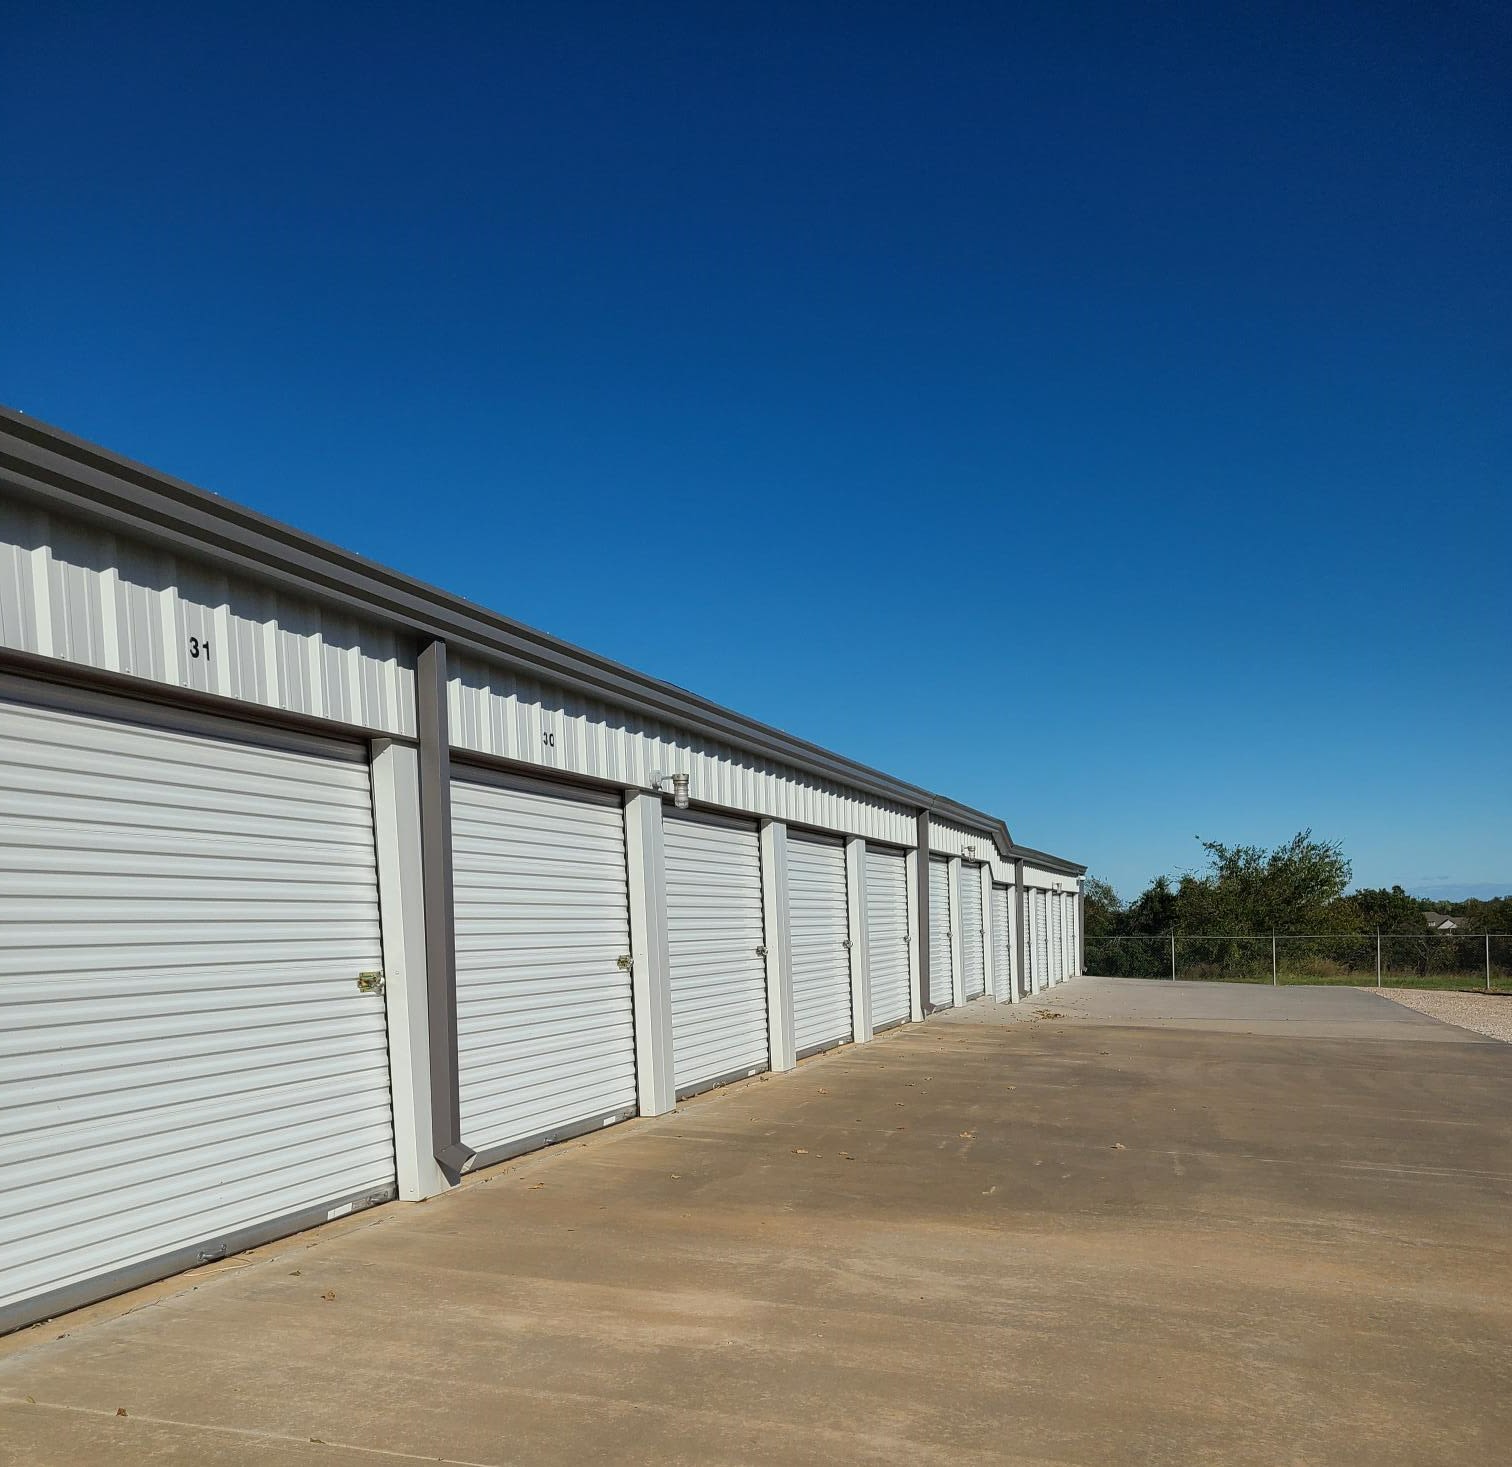 Map and directions to KO Storage in Harrah, Oklahoma